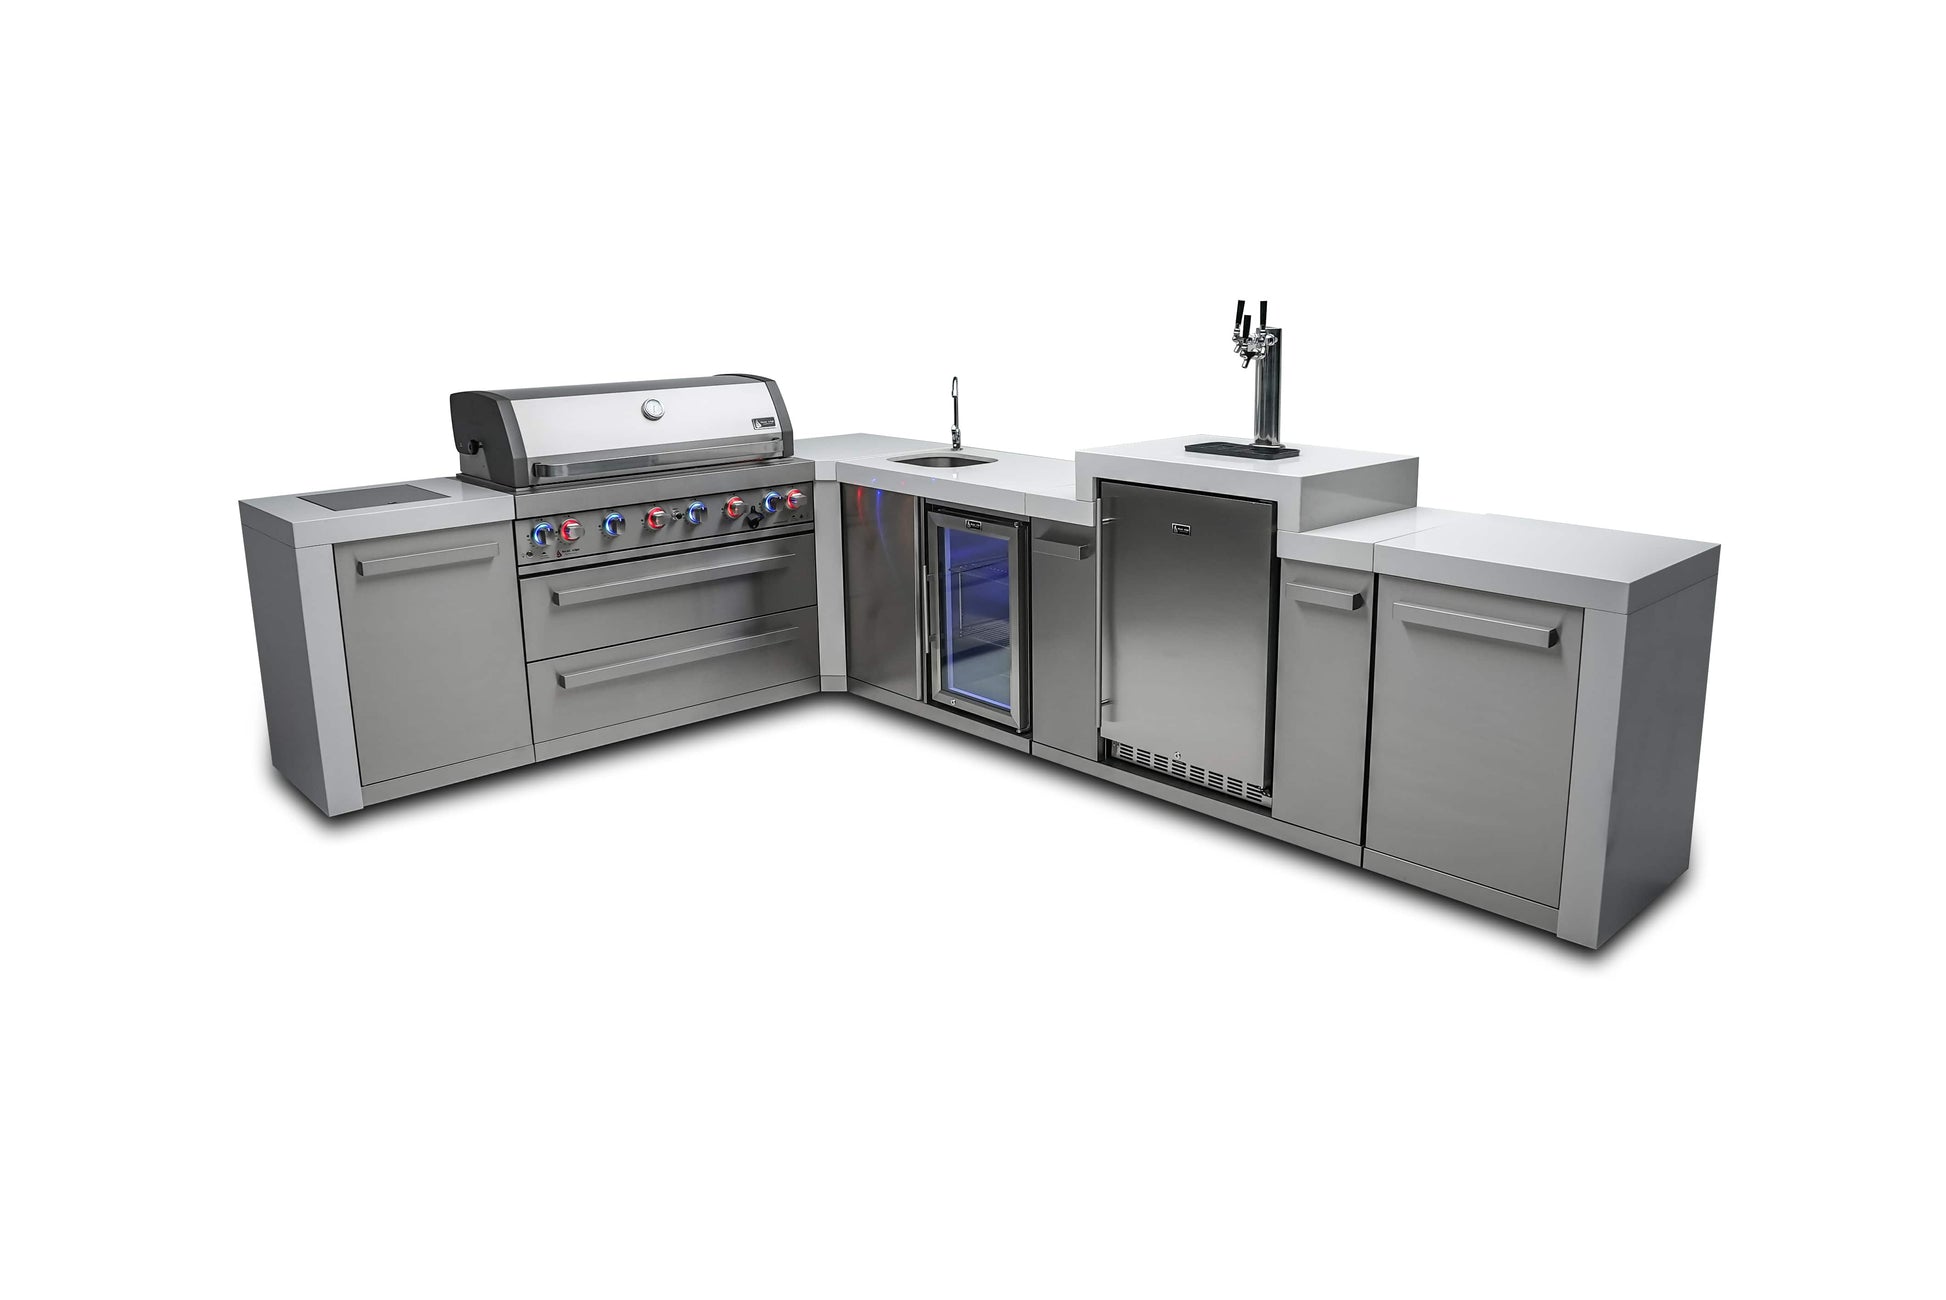 Mont Alpi Deluxe 90 Degree Island Grill with Kegerator and Beverage Centre - front view